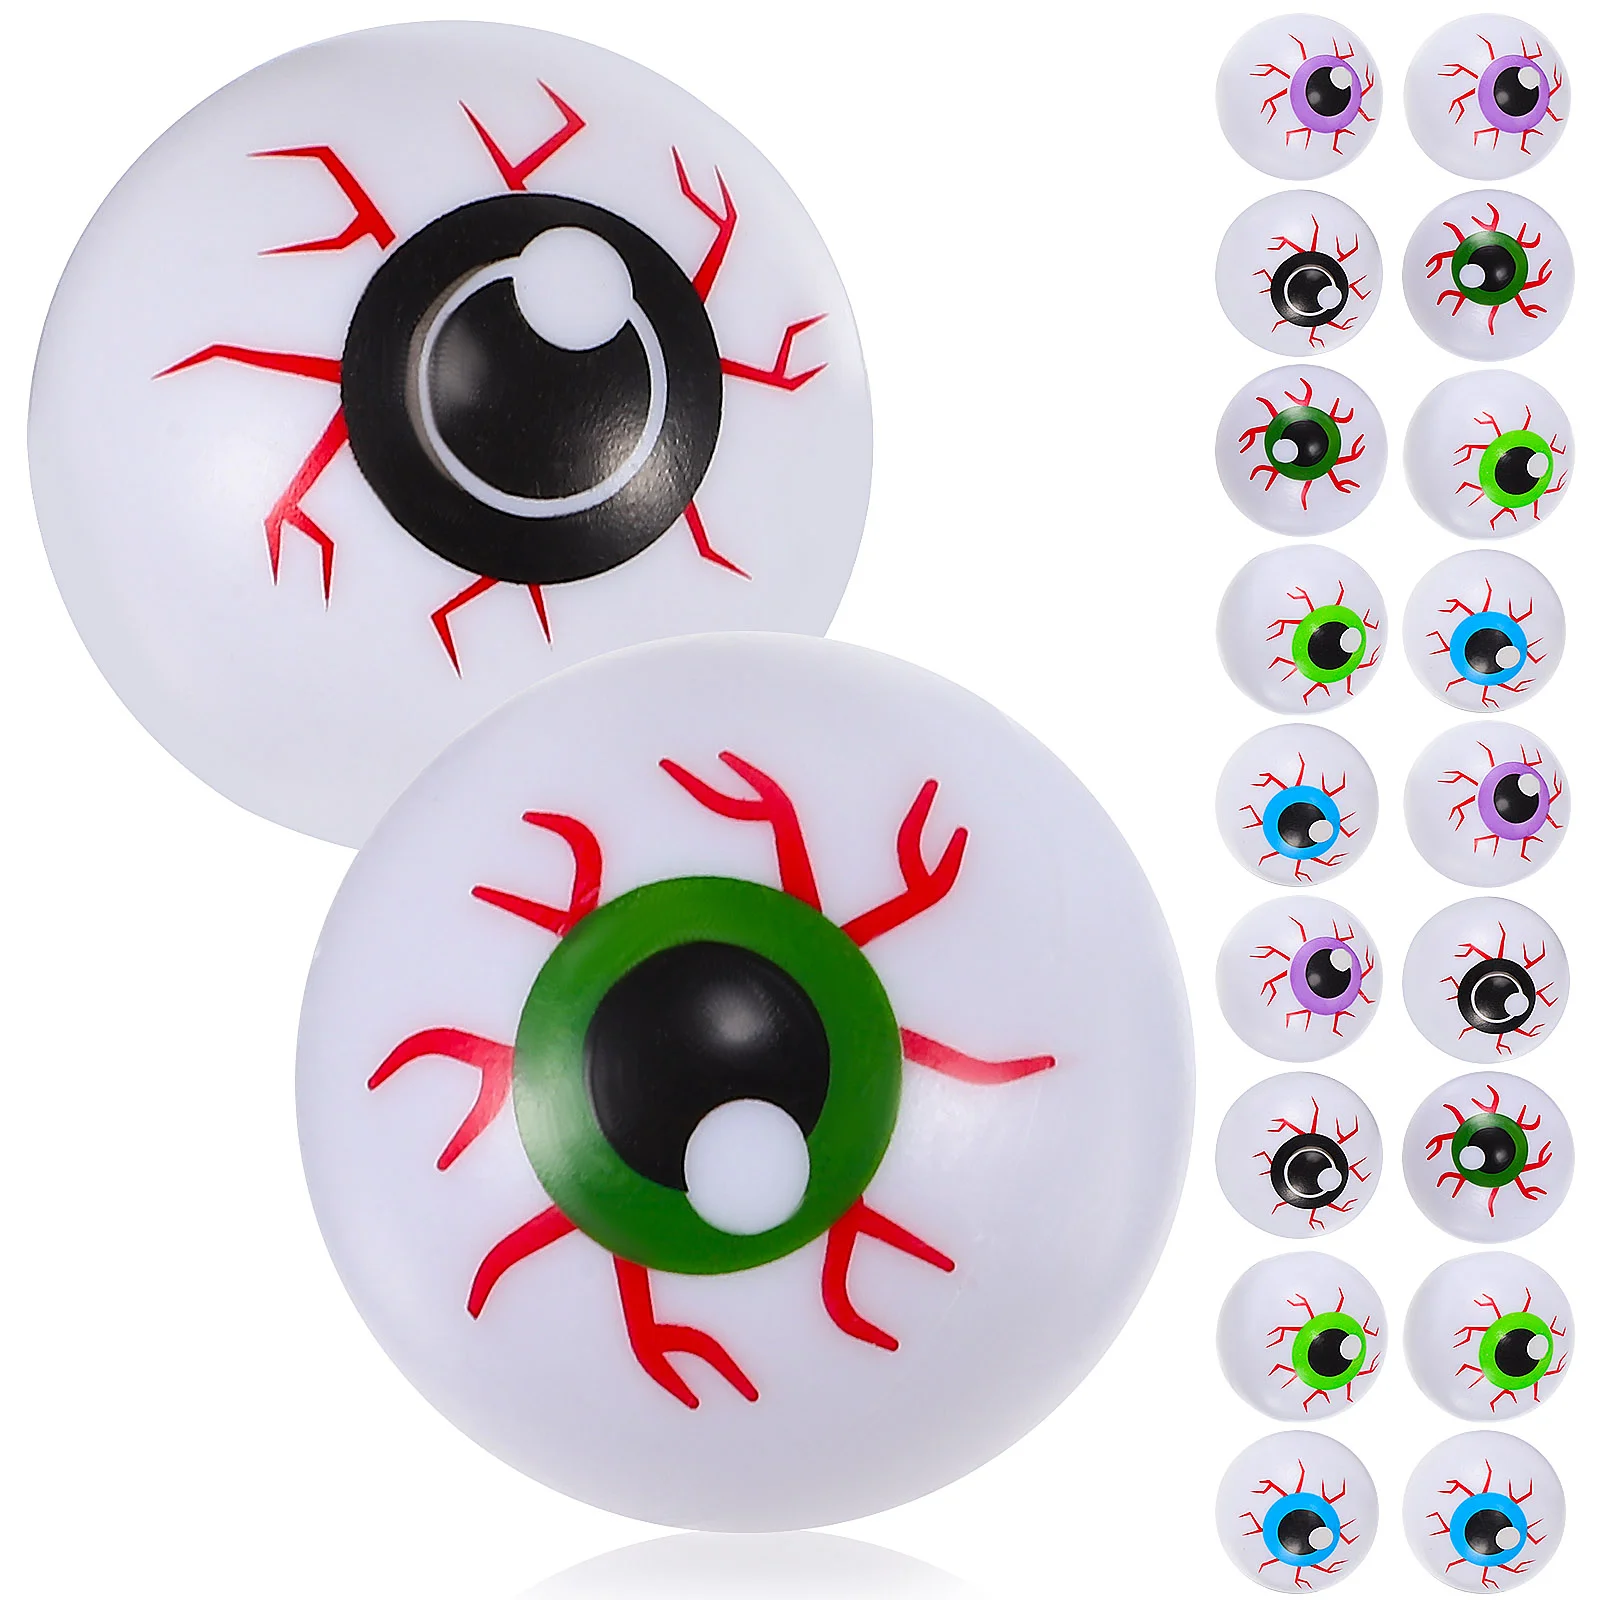 

20 Pcs Halloween Eyeballs Plastic False Toy For Crafts Fake Party Plaything Favor Decoration Spoof